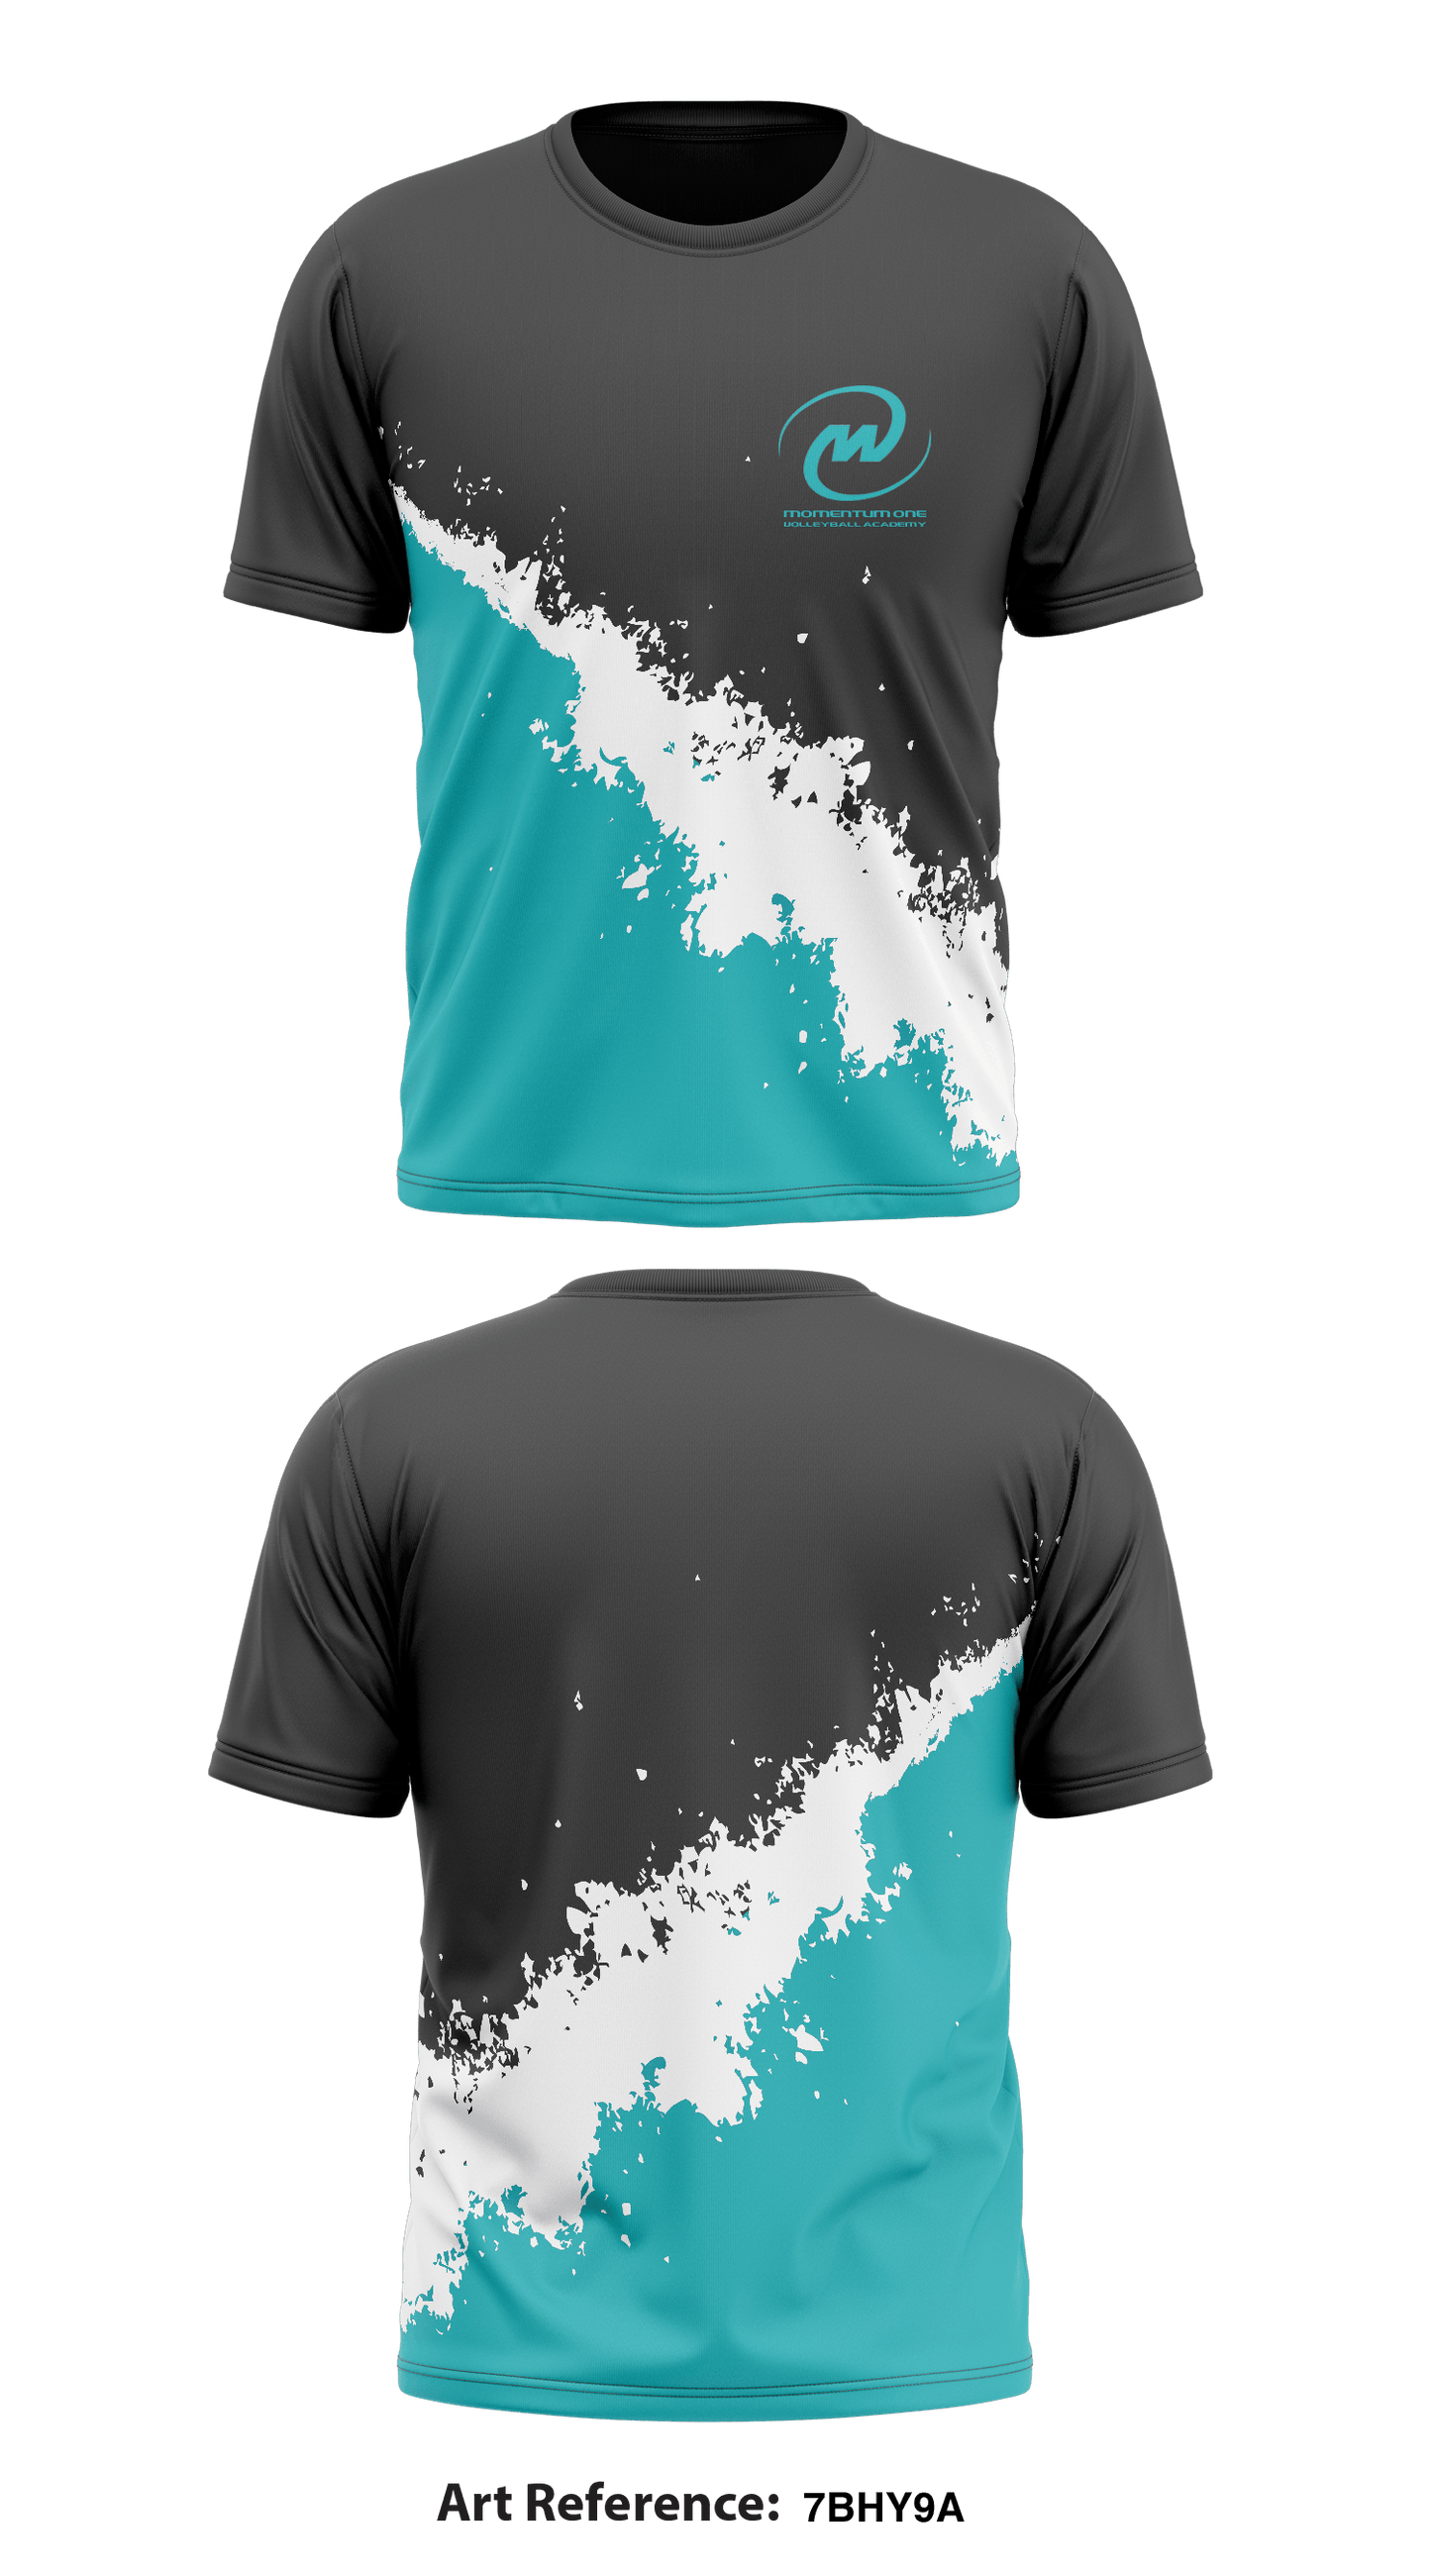 Momentum One Volleyball Academy Core Men's SS Performance Tee - 7bHY9a